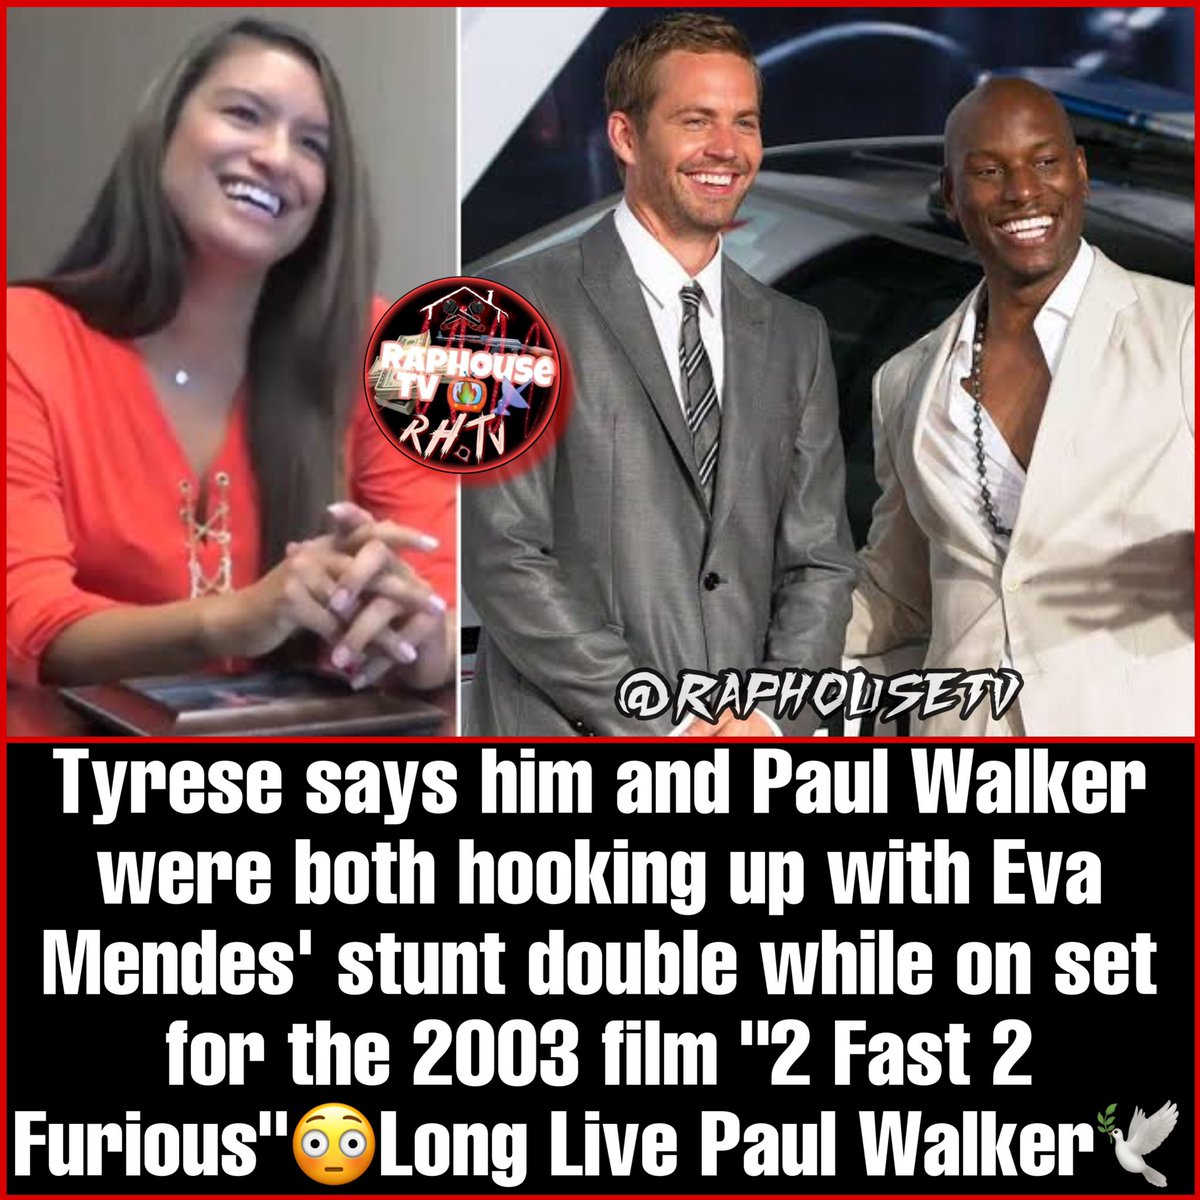 Tyrese says him and Paul Walker were both hooking up with Eva Mendes' stunt double while on set for the 2003 film '2 Fast 2 Furious'😳
Rest in Peace & Long Live Paul Walker🕊️